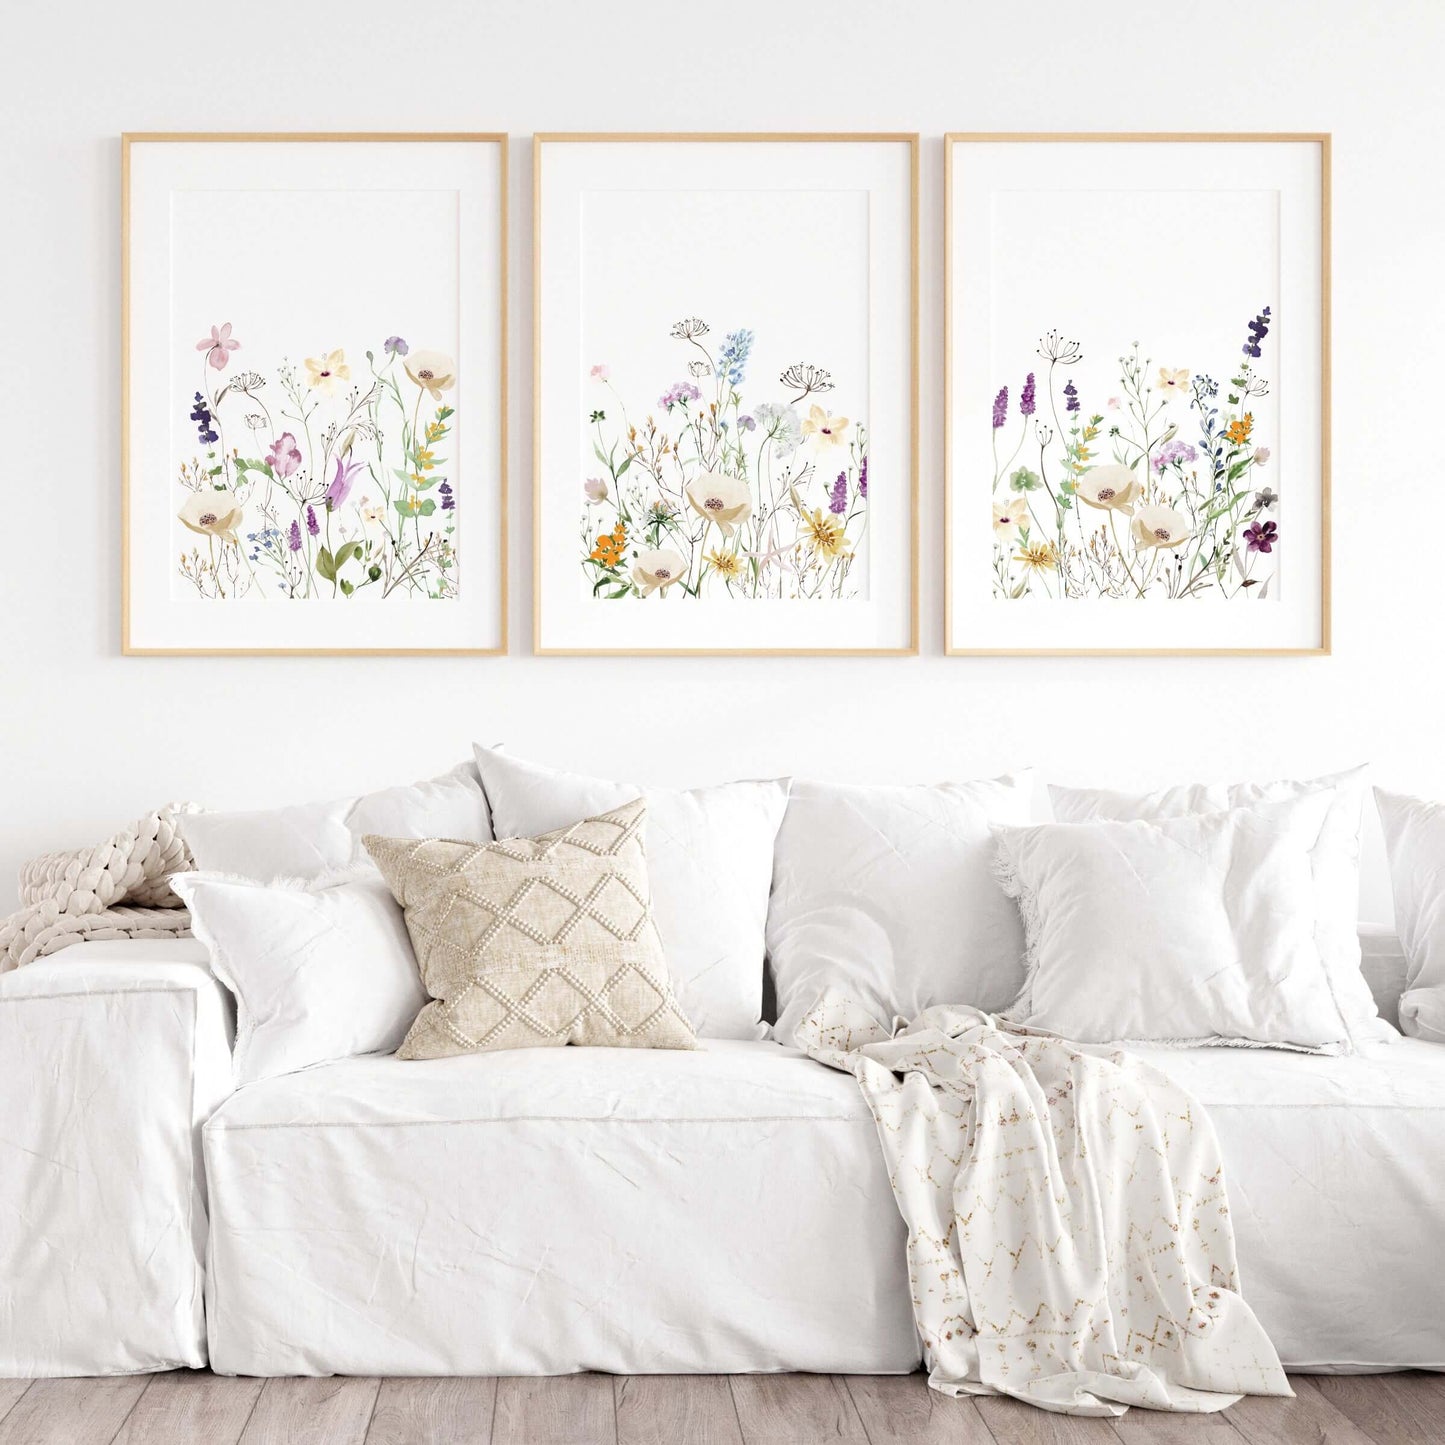 colorful wildflower wall decor set of 3 hanging in living room above a white couch